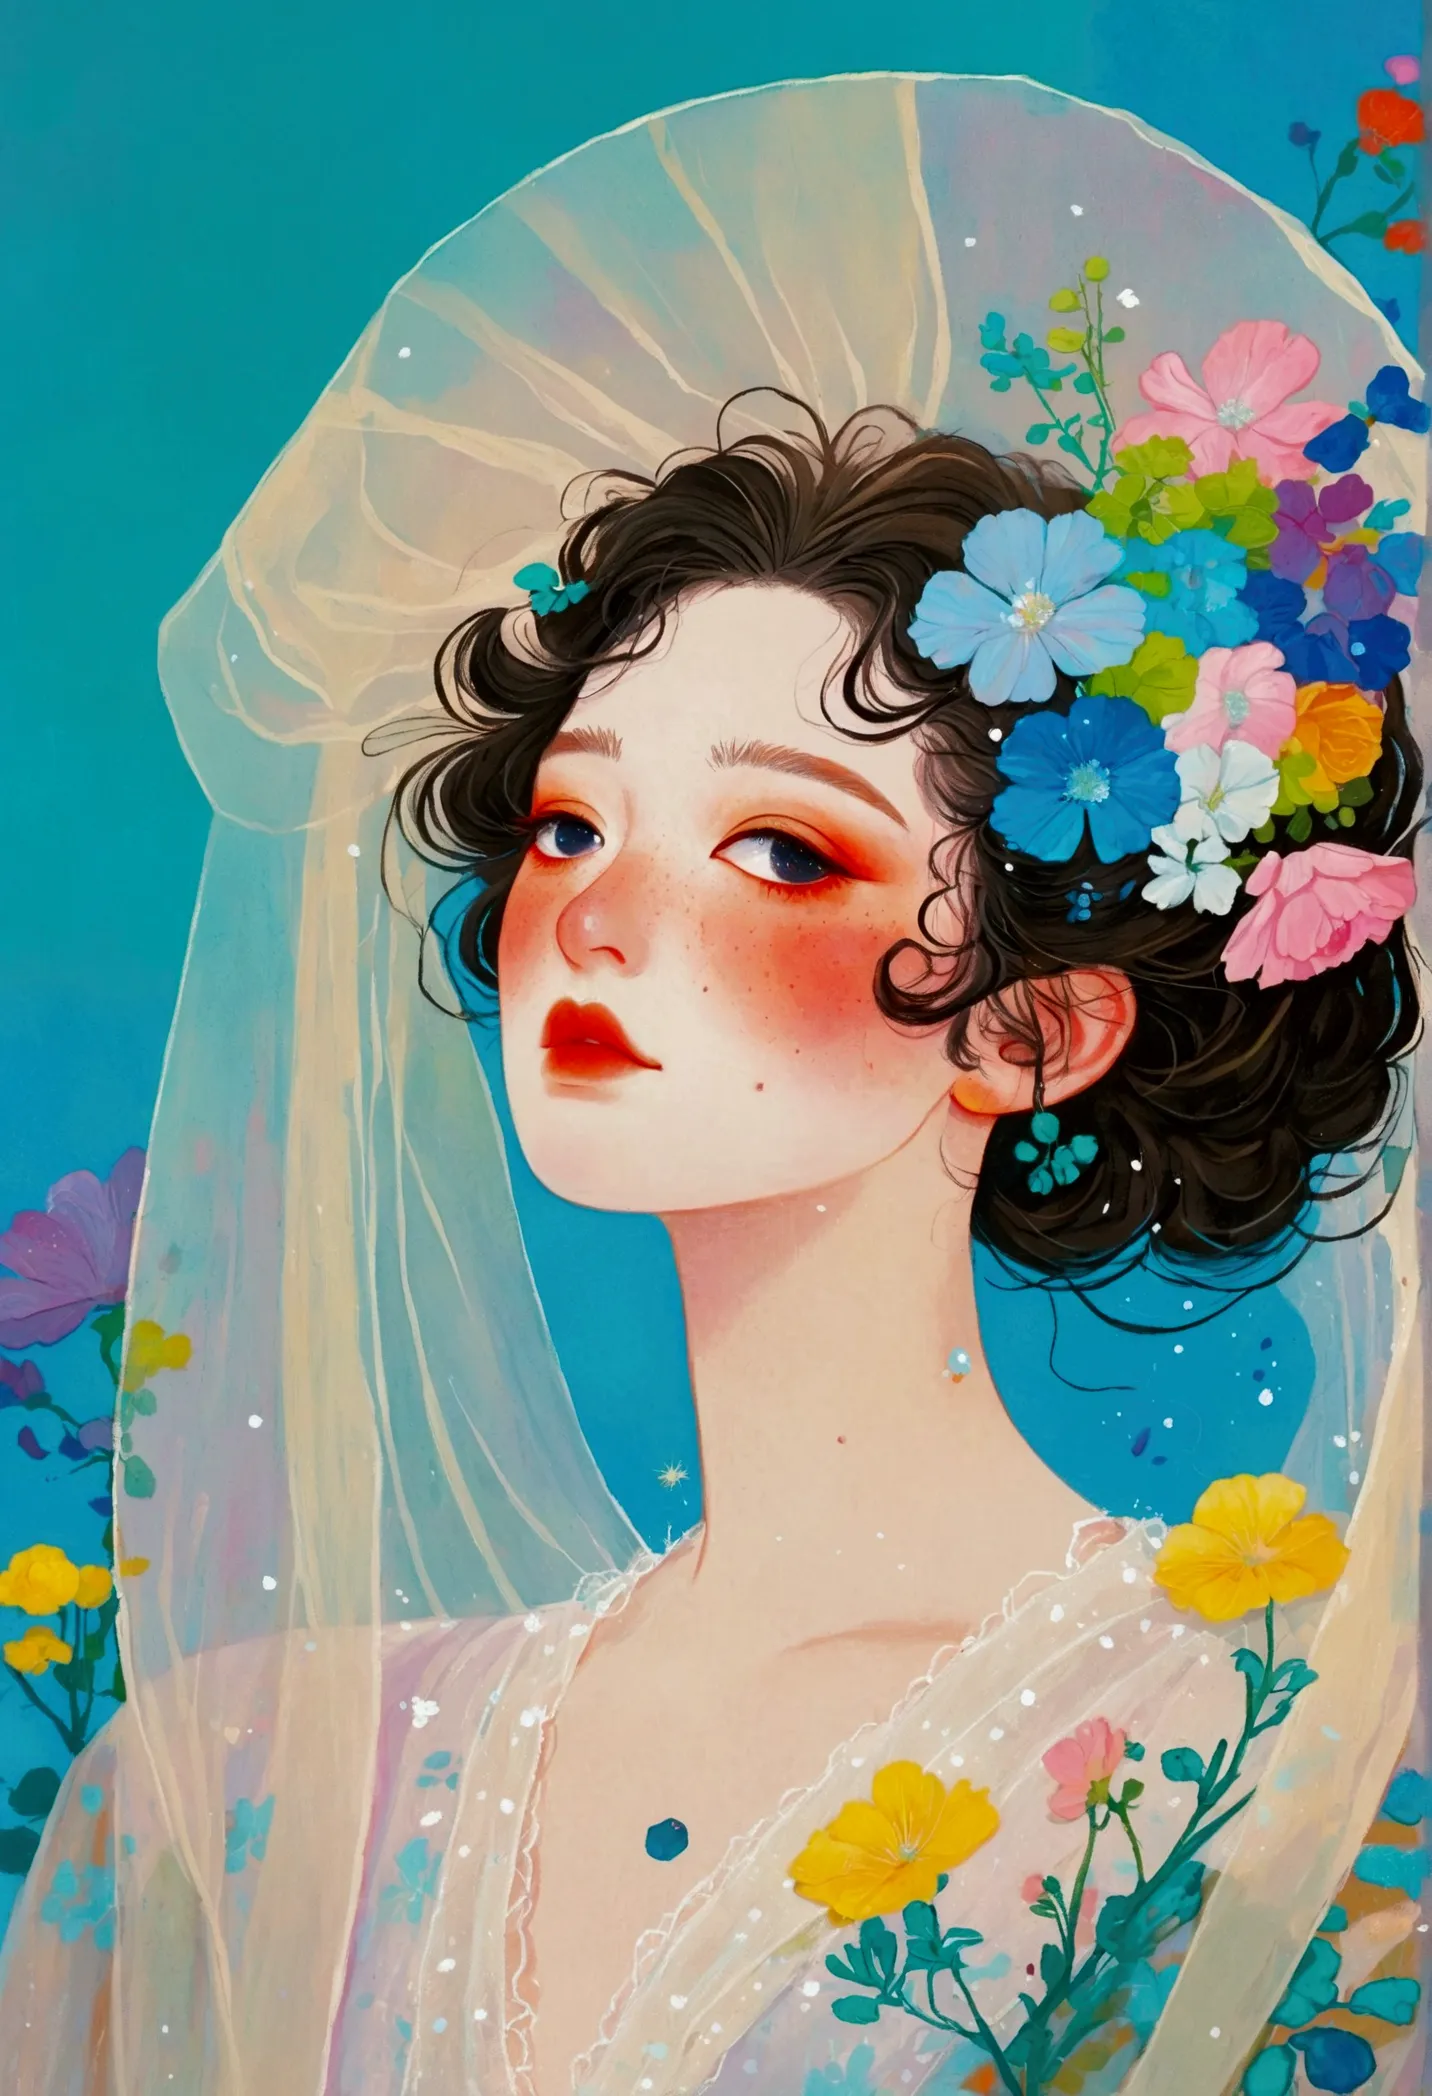 There is a woman wearing a veil，Flowers on the veil, A detailed painting inspired by jeonseok lee, tumblr, Fantasy Art, dignifie...